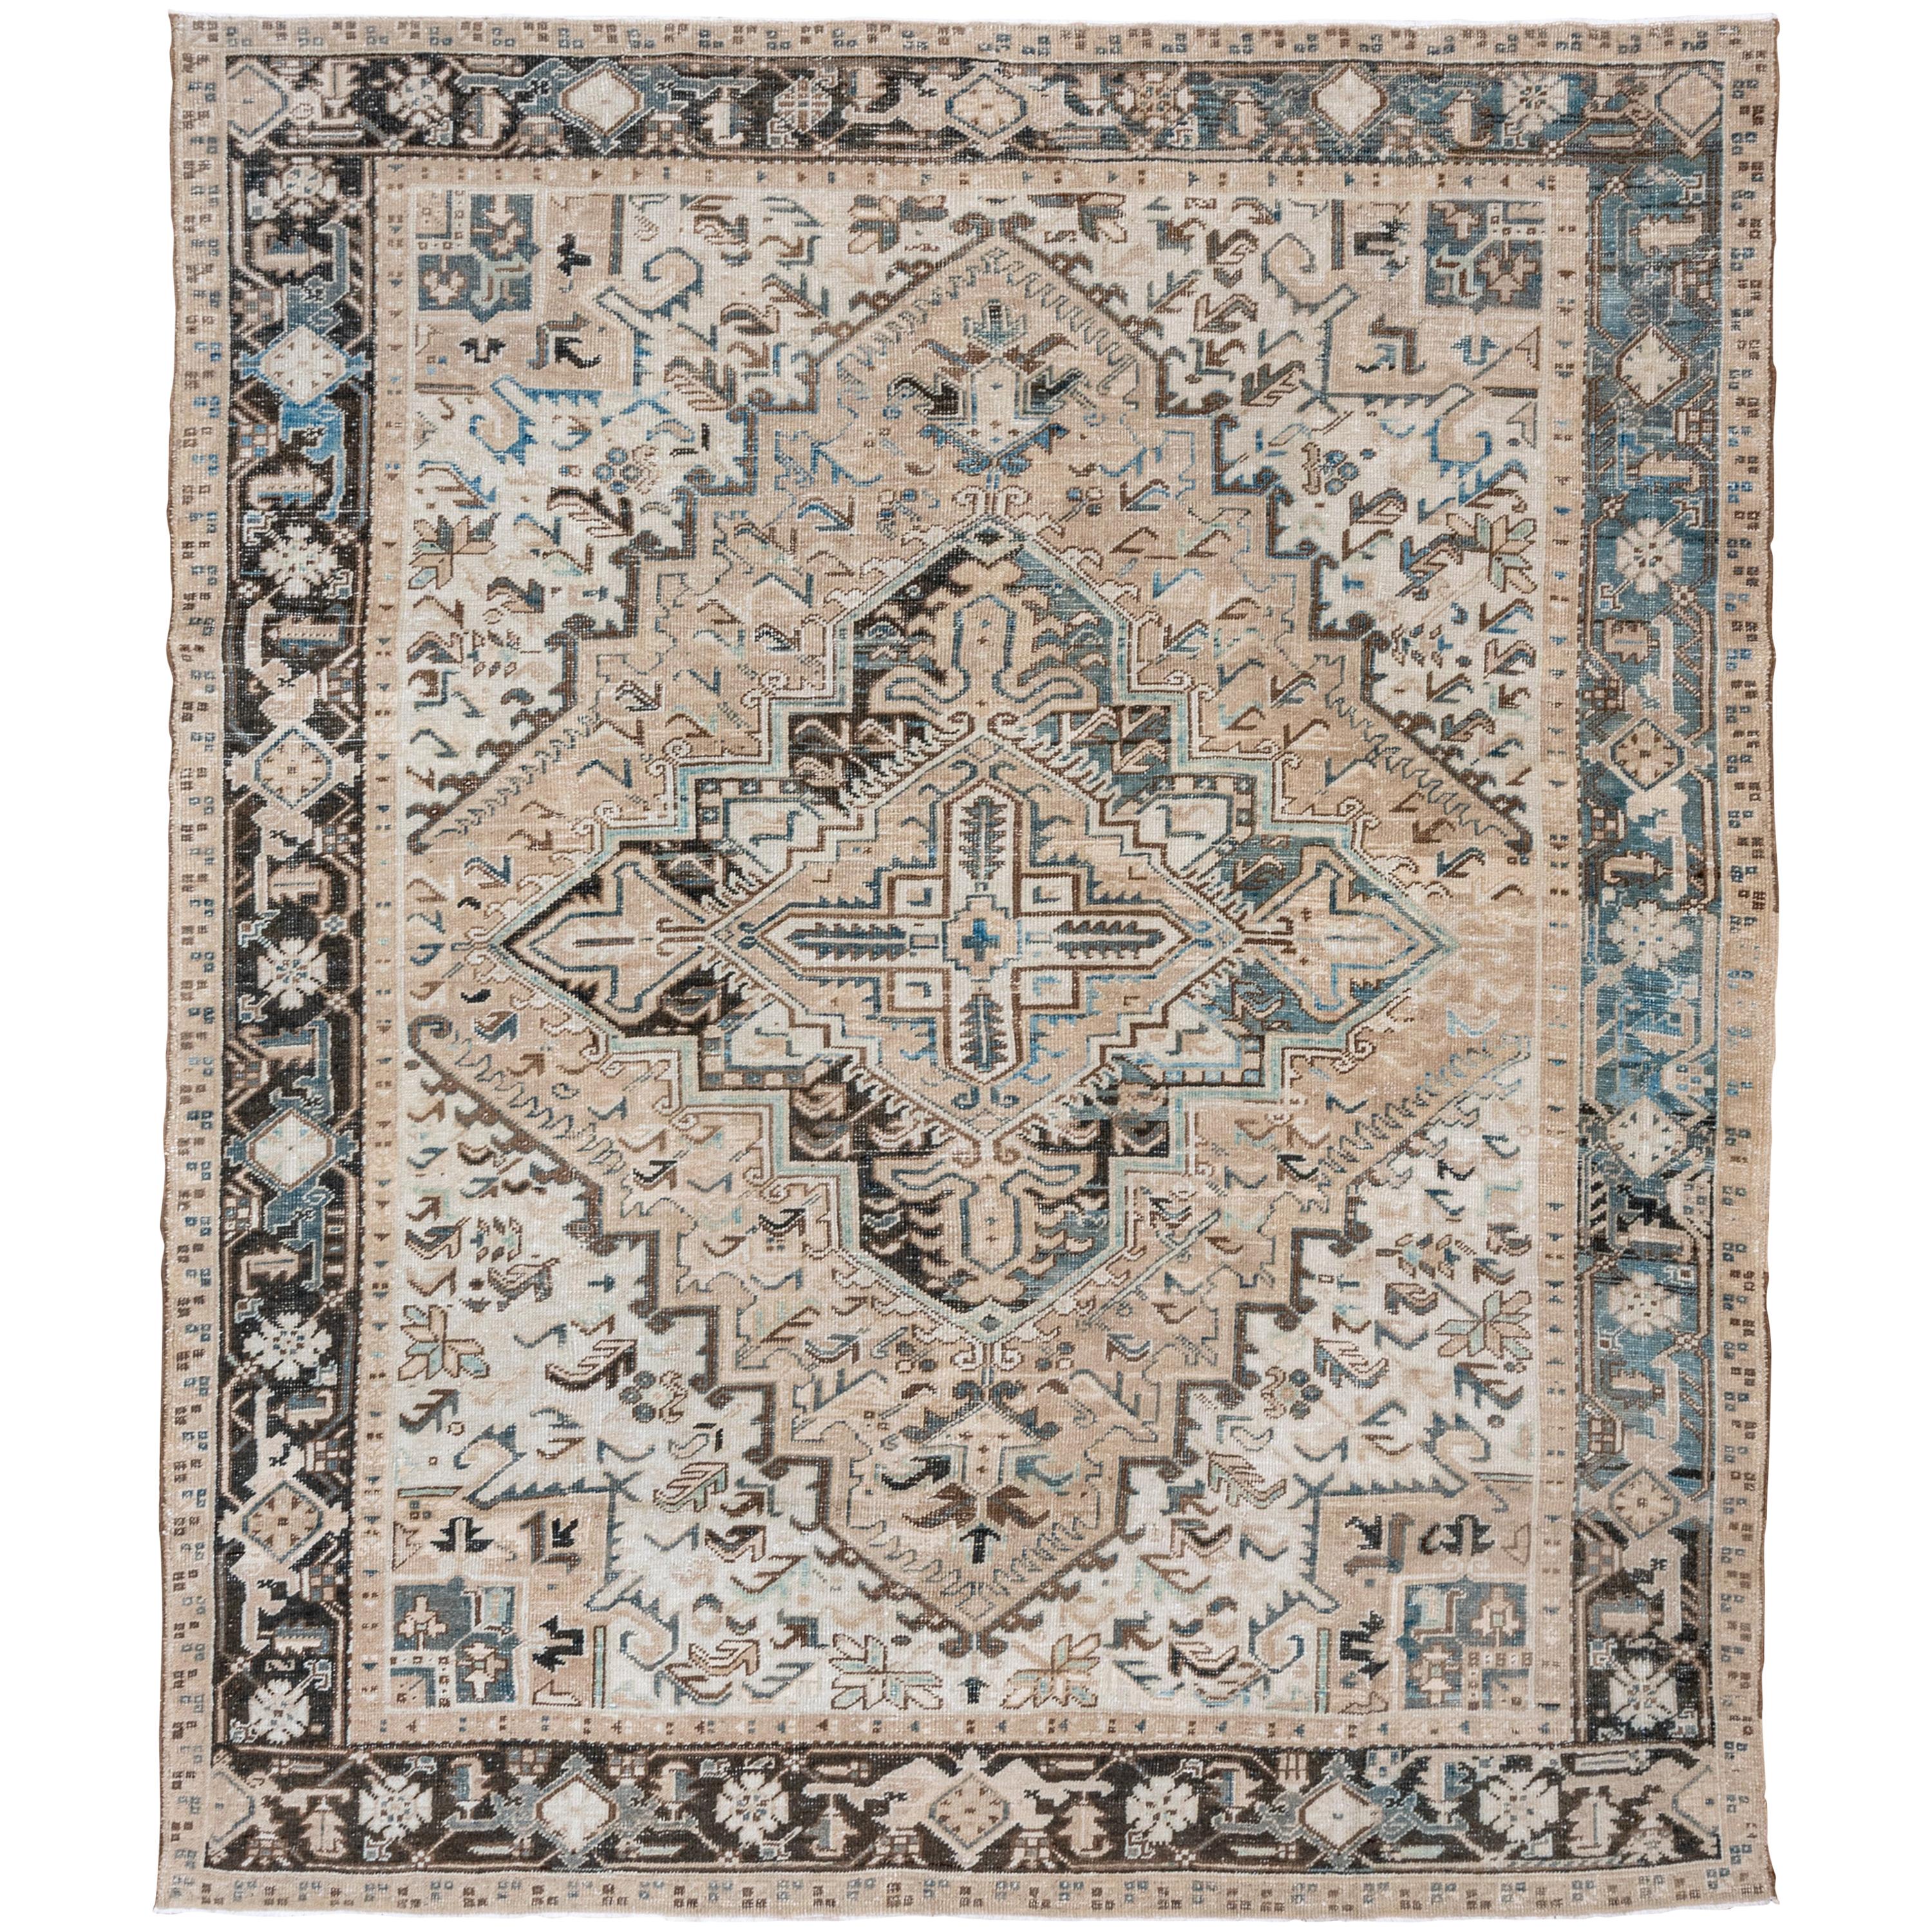 Antique Ivory Persian Heriz Rug, Ivory and Beige Field Dark Borders Blue Accents For Sale